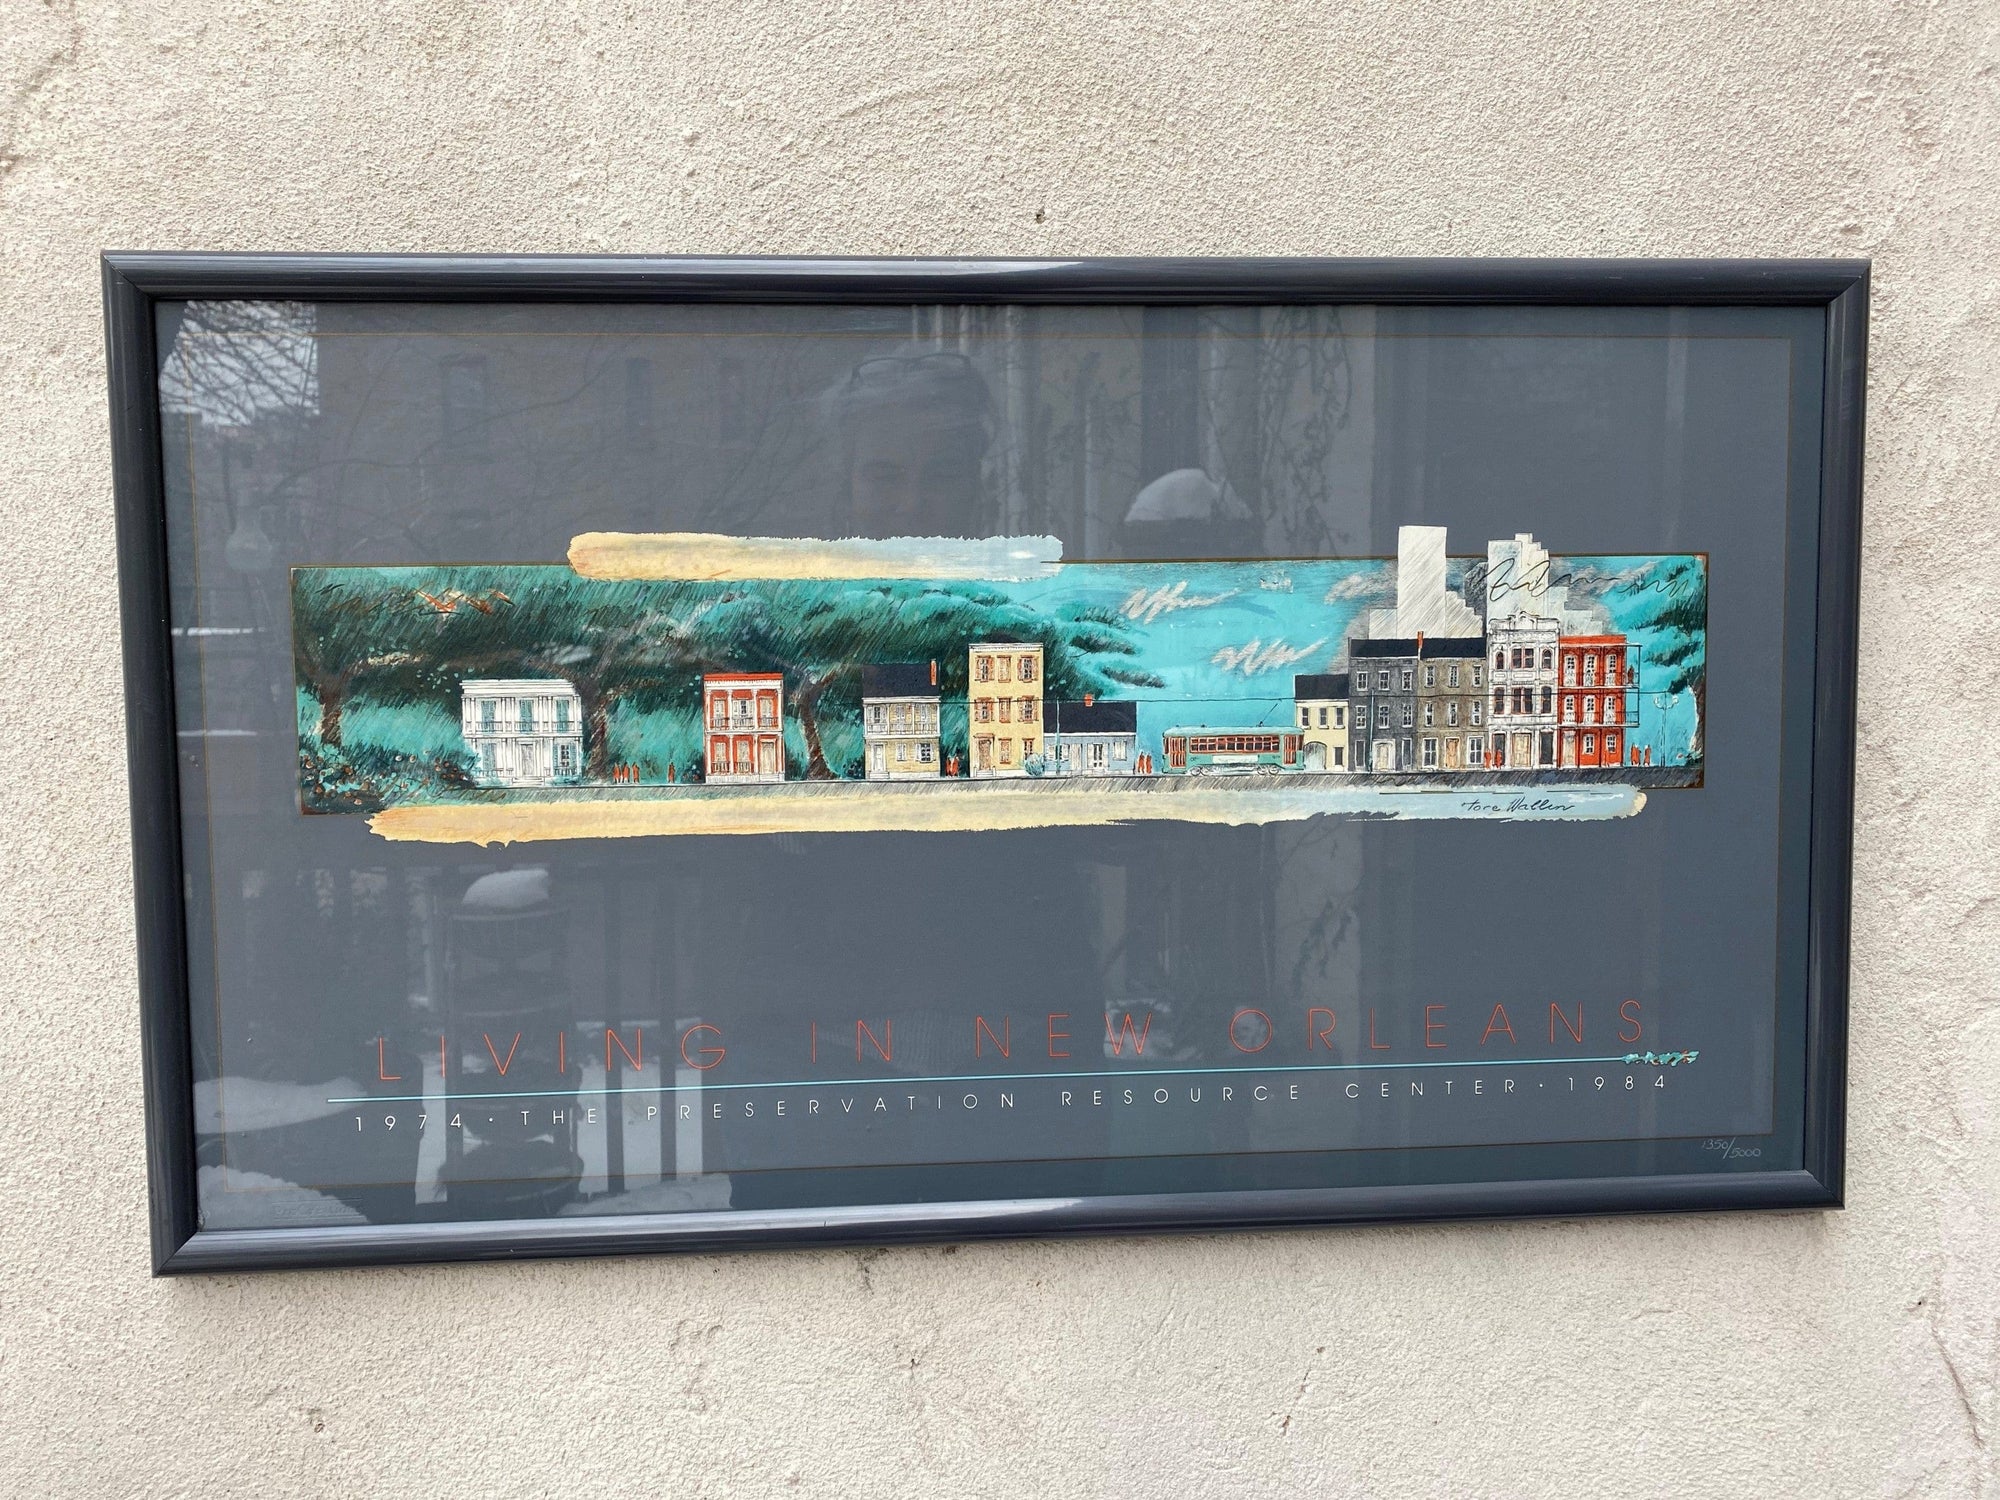 I Like Mike's Mid Century Modern Posters, Prints, & Visual Artwork "Living in New Orleans" Framed Signed Limited Edition Lithograph by Tore Wallen 1984